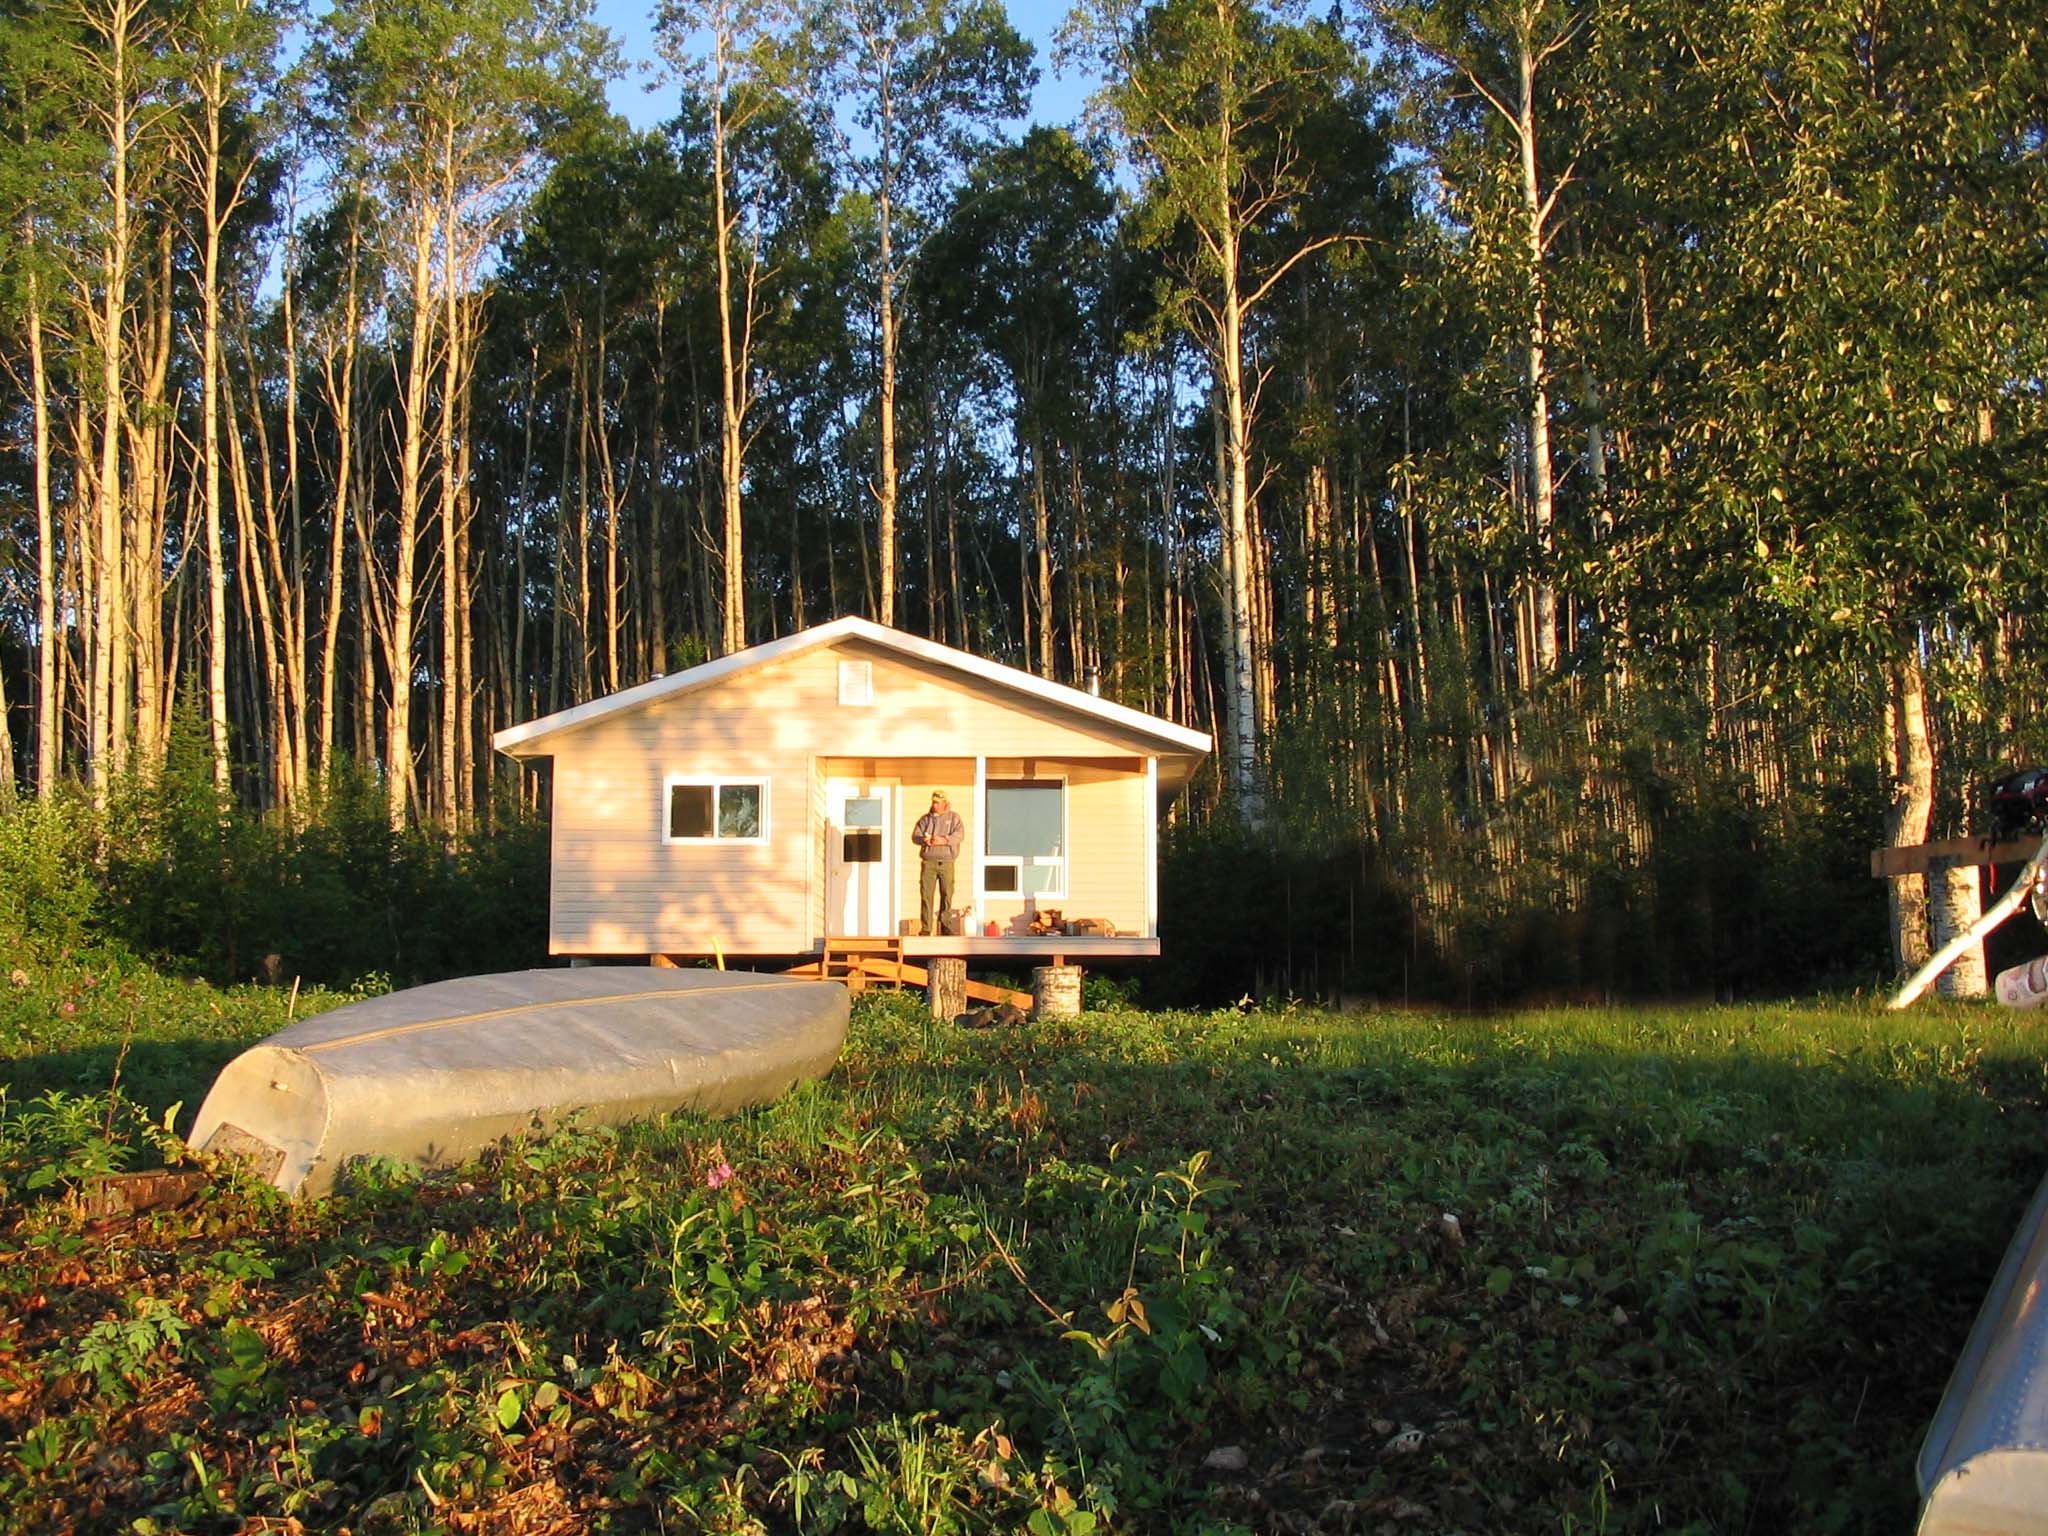 Leuenberger’s Wilderness Outpost on Kellow Lake